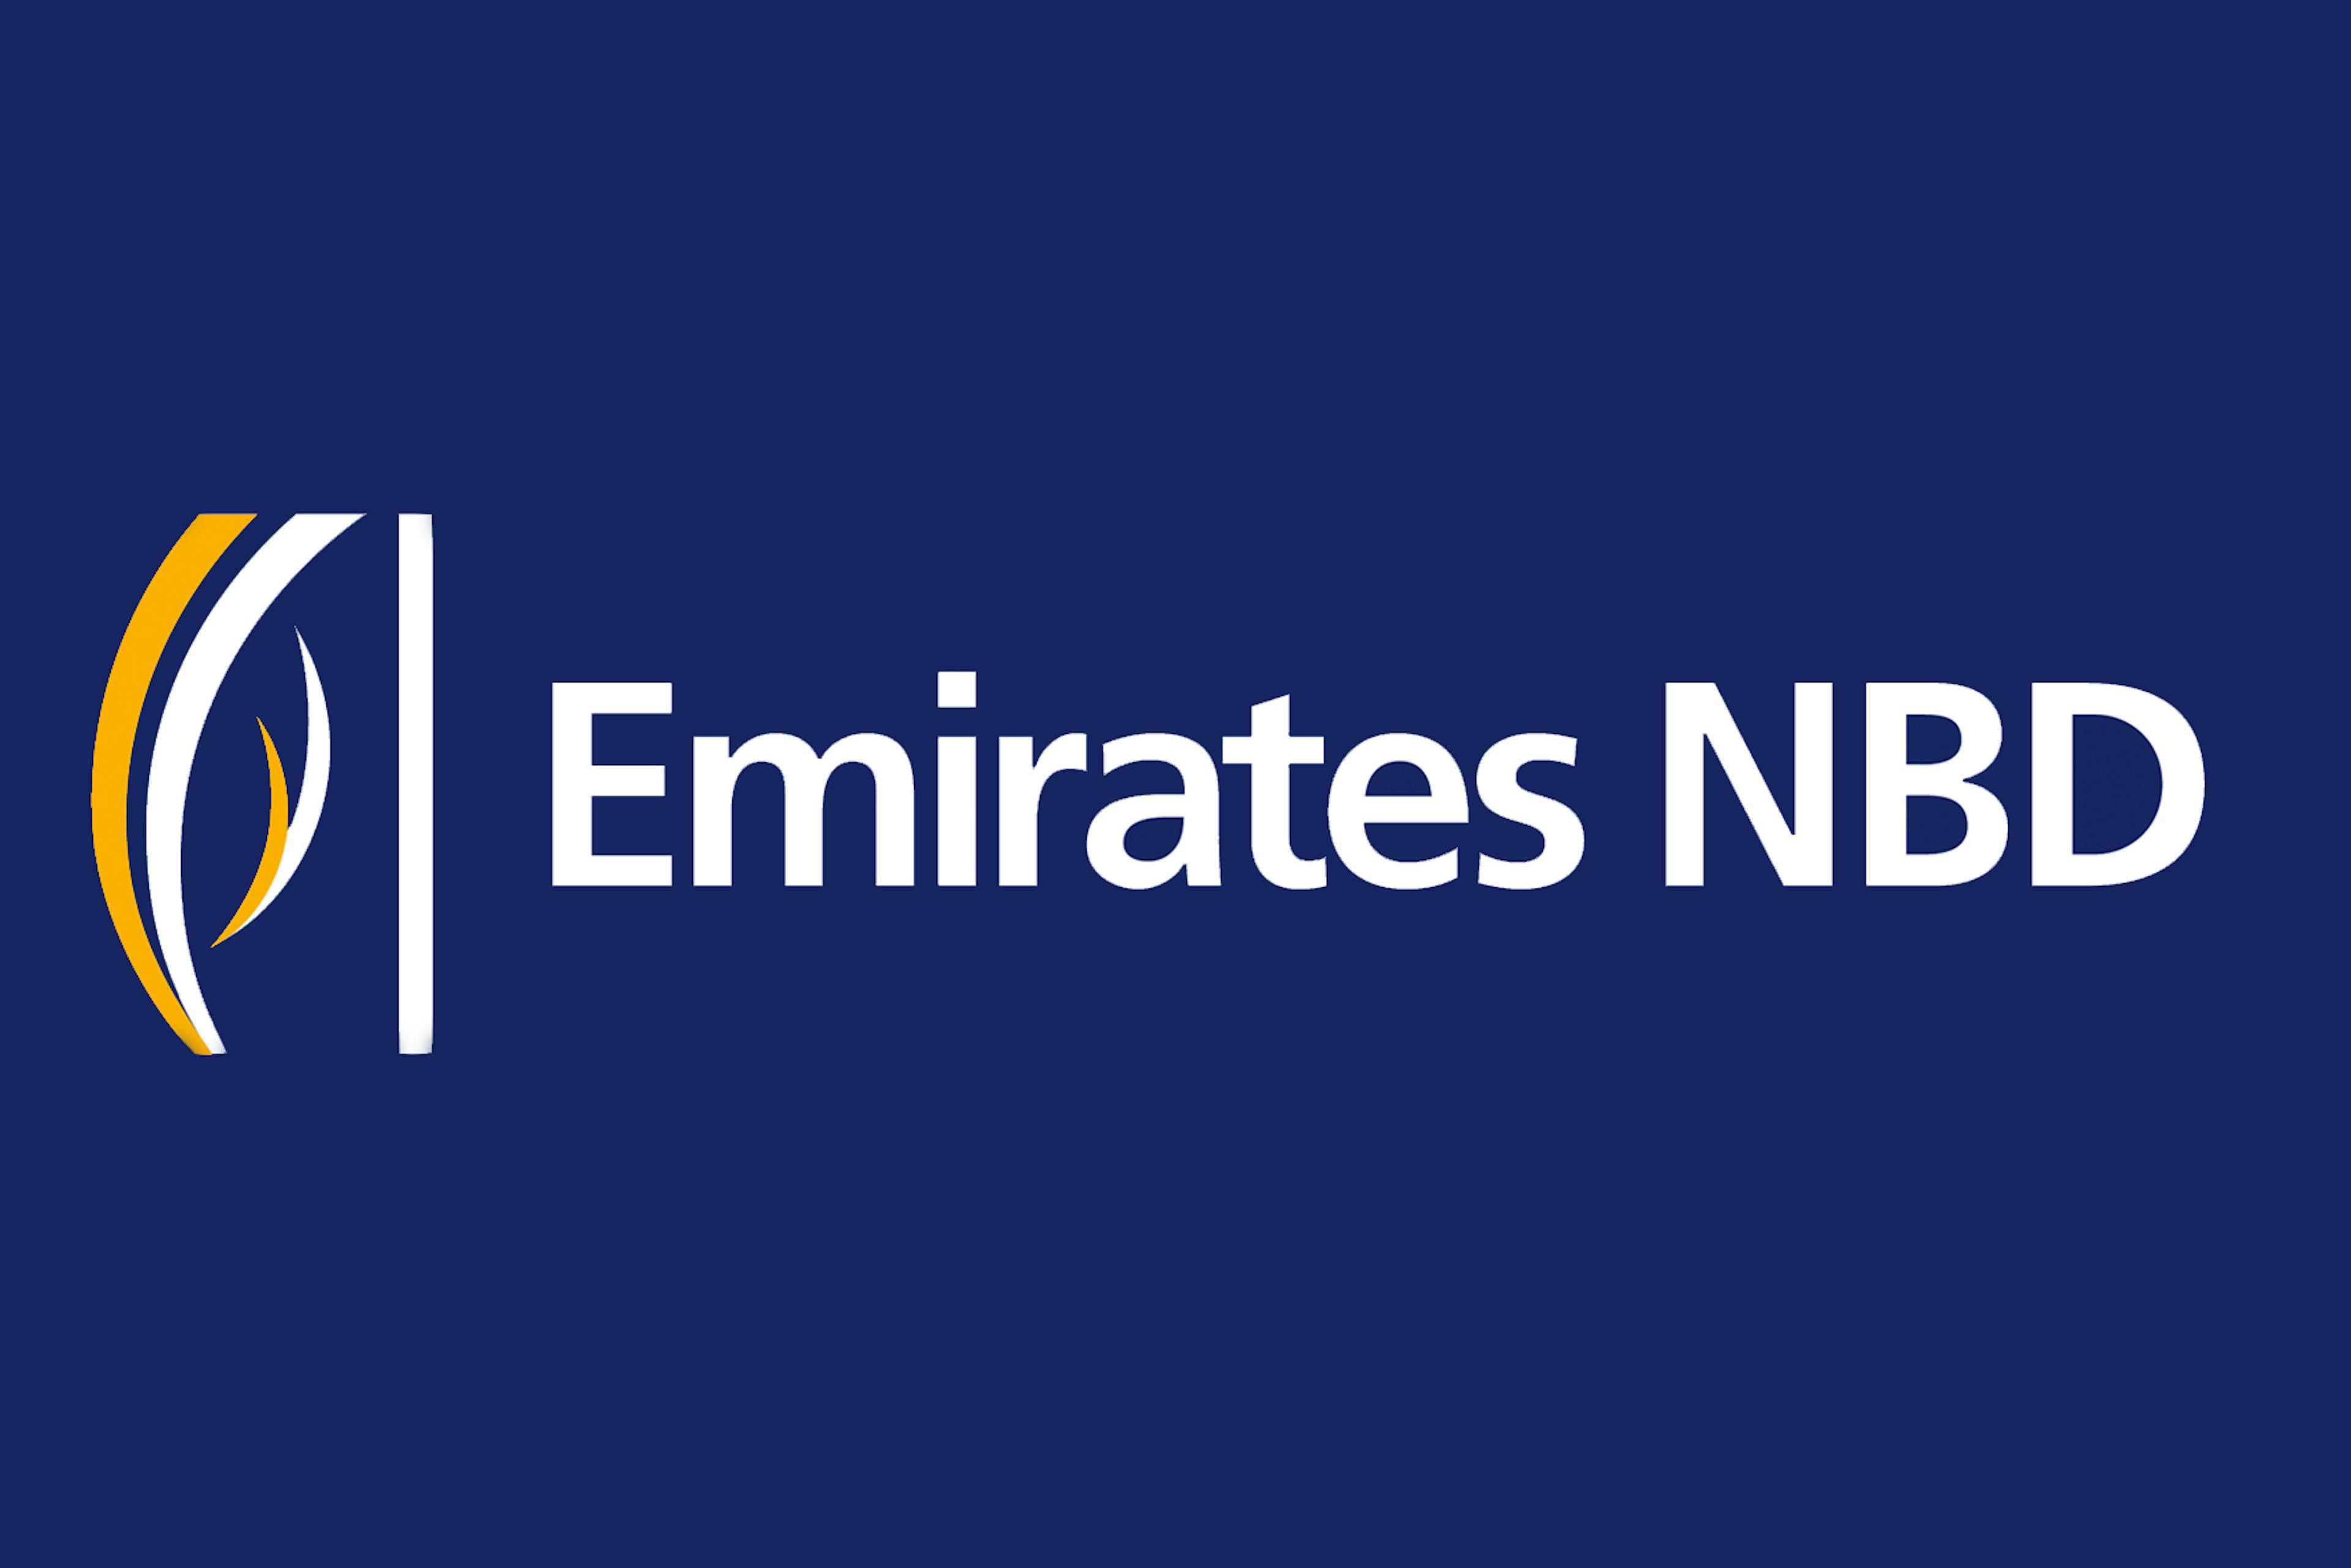 Overview of Emirates NBD